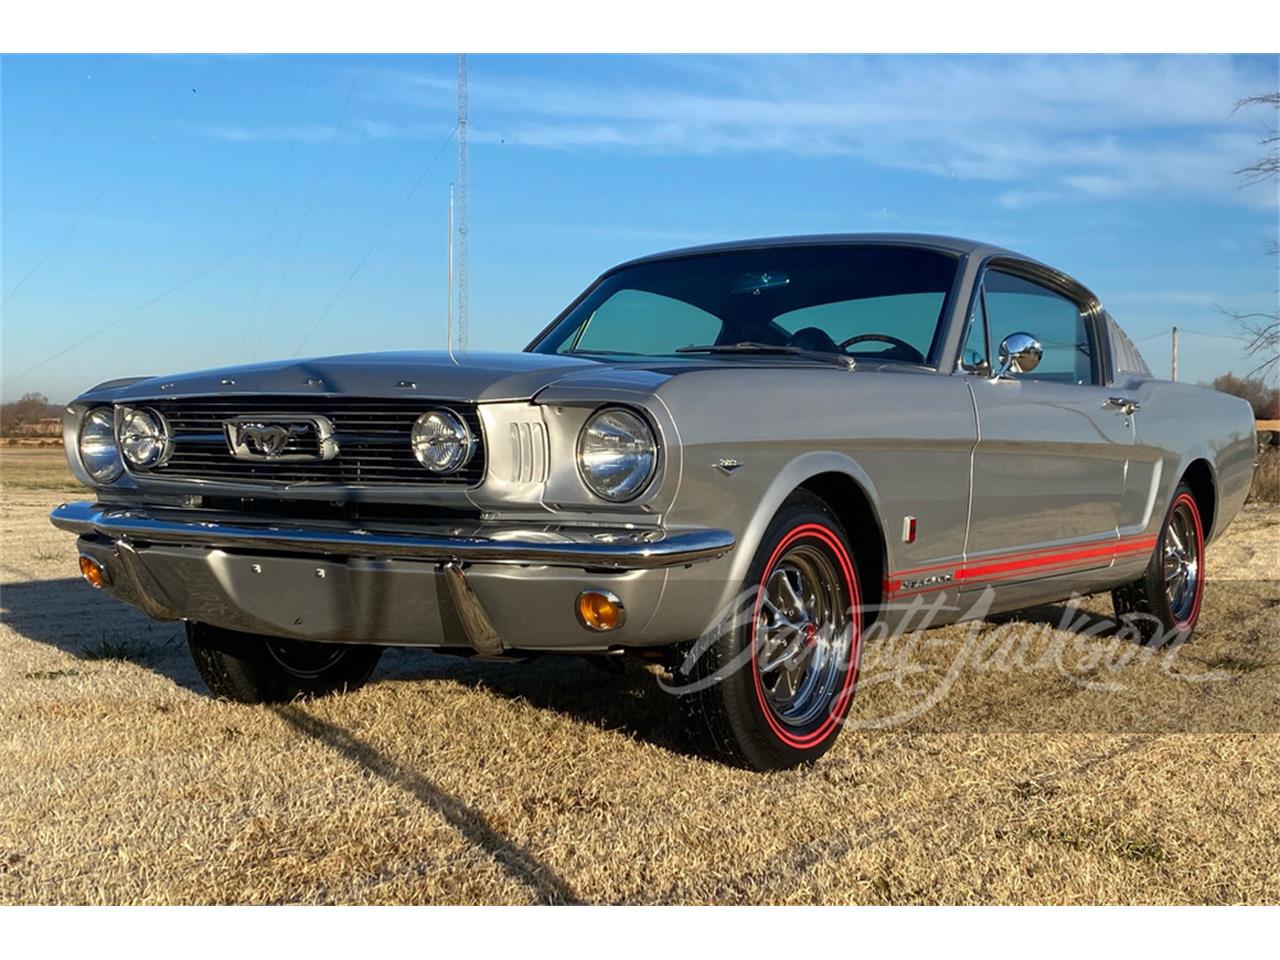 For Sale at Auction: 1966 Ford Mustang in Scottsdale, Arizona for sale in Scottsdale, AZ